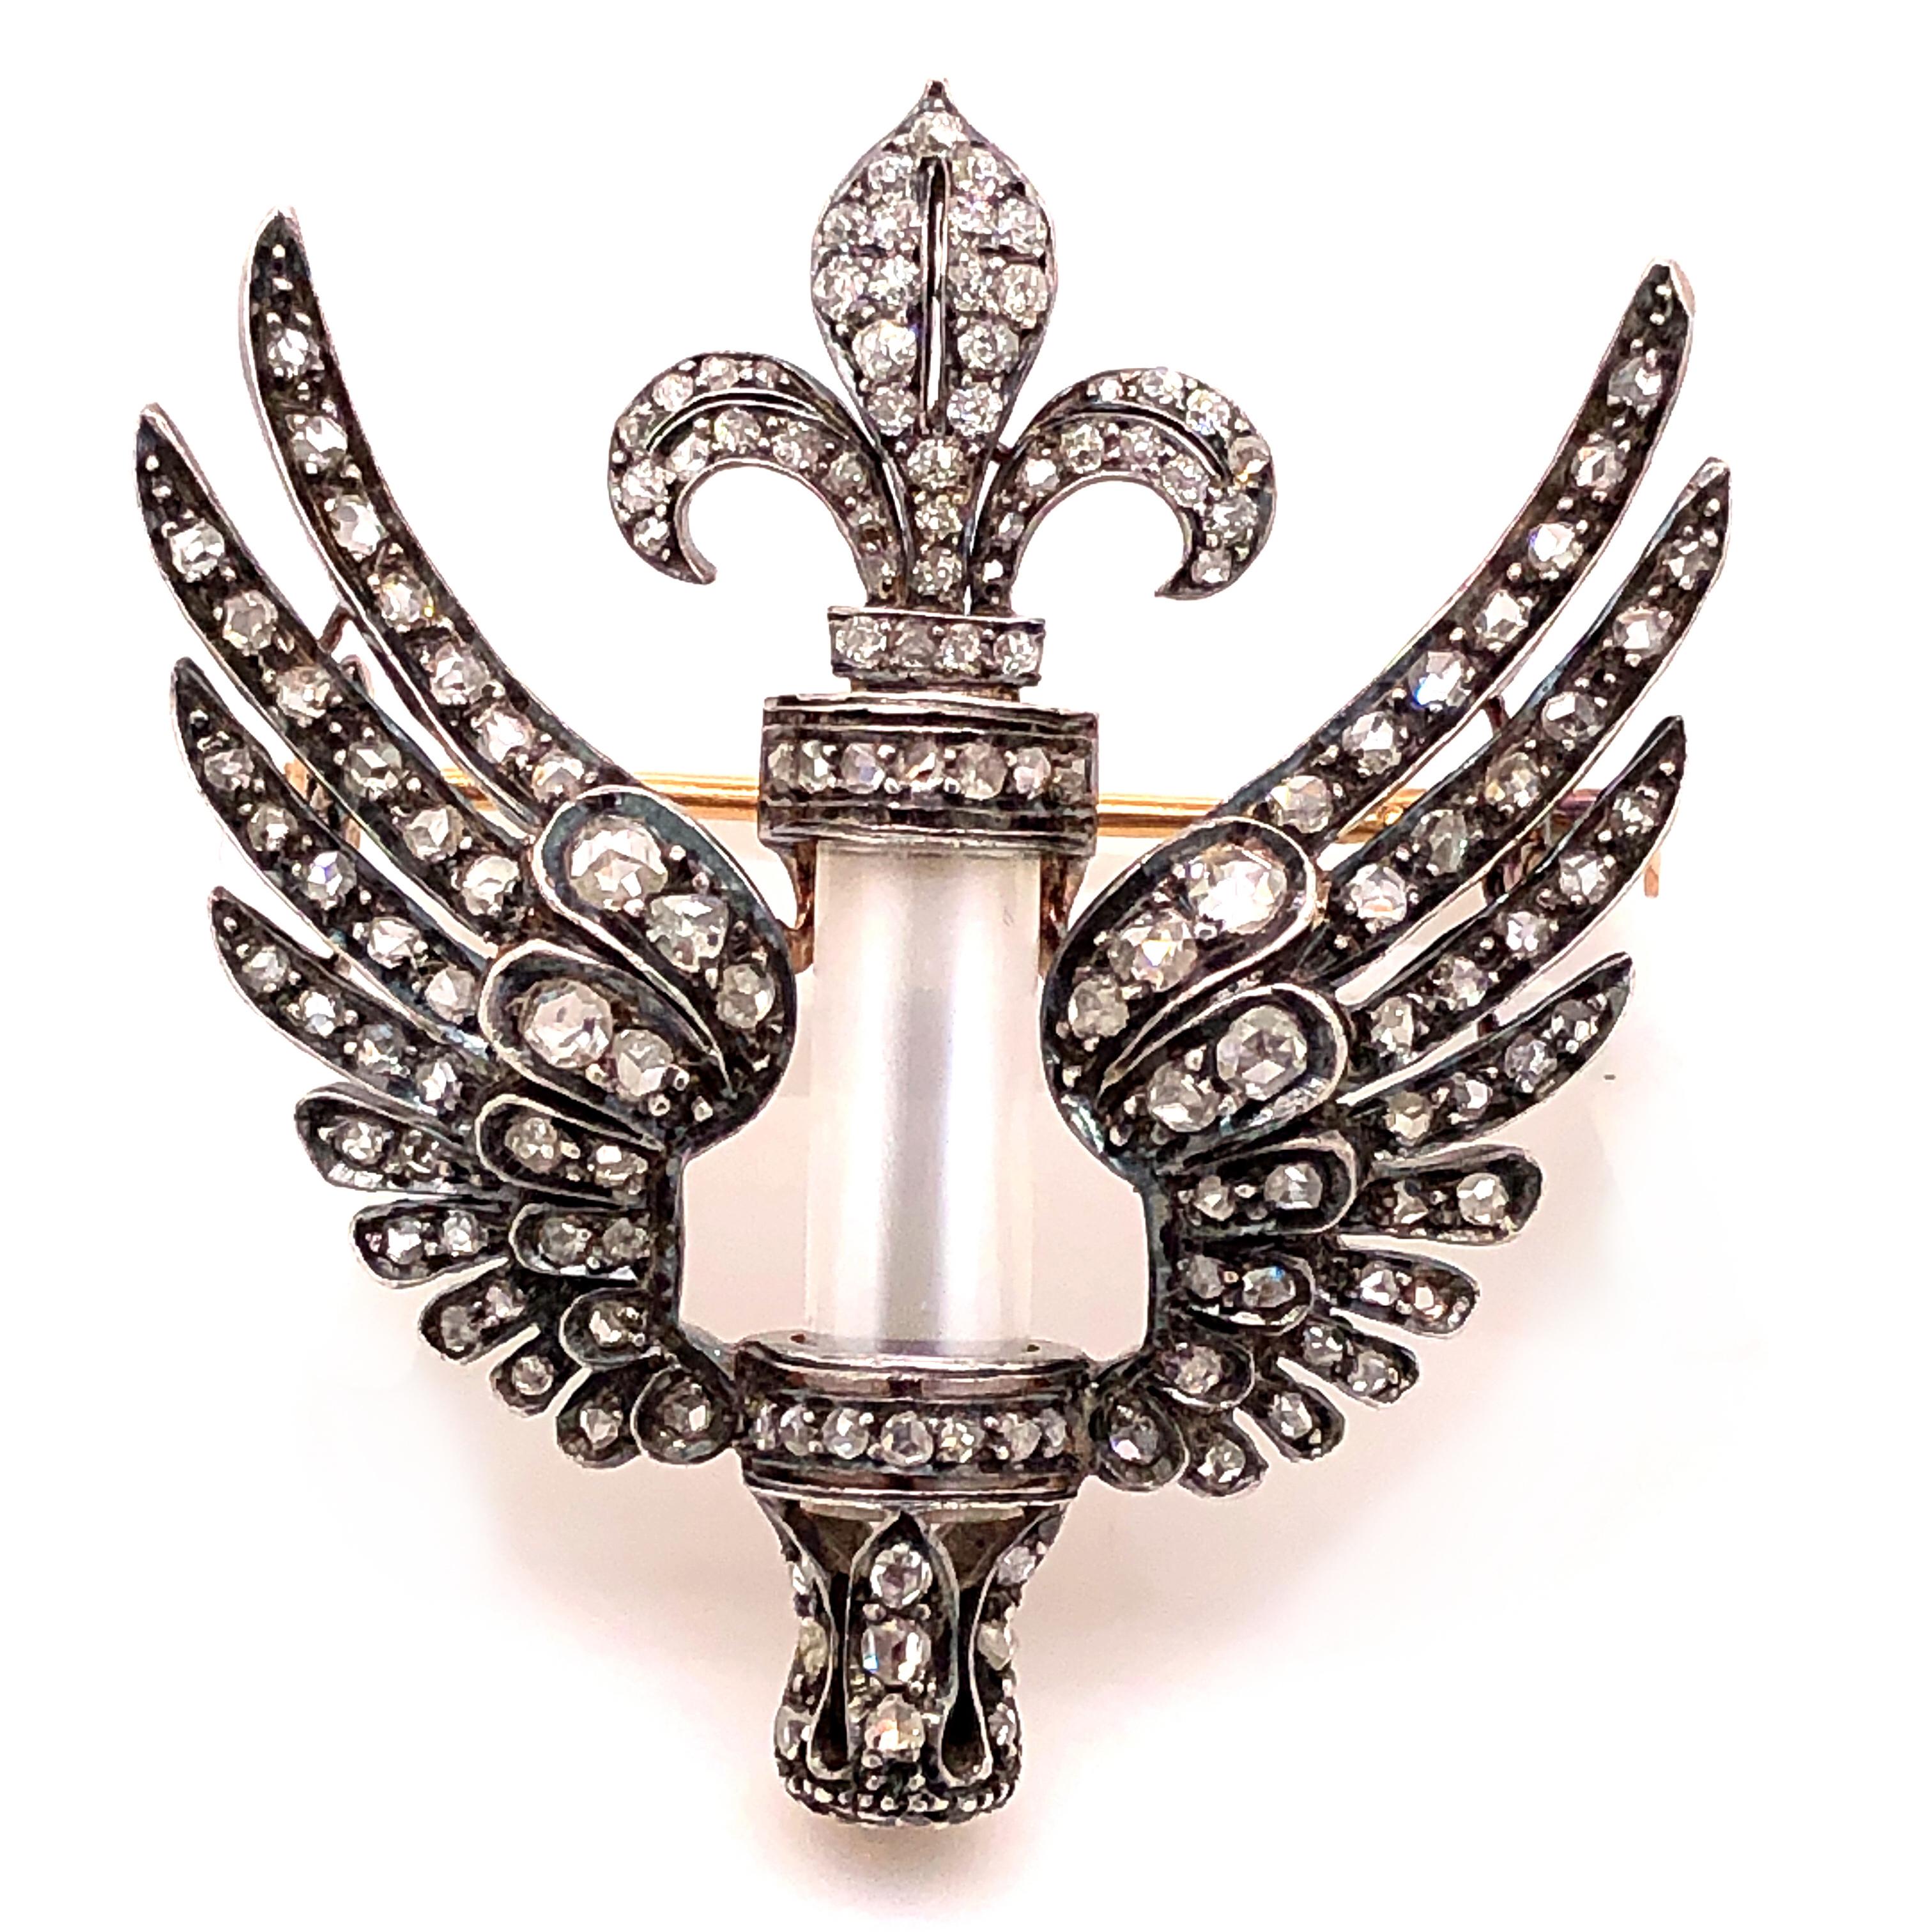 A mesmerisingly beautiful Victorian brooch with old and rosecut diamonds, 1880s. The brooch, which can also be worn as a pendant, depicts two wings that centre a cylindric moonstone between them. A fleur-de-lys sits on the top of the brooch. The